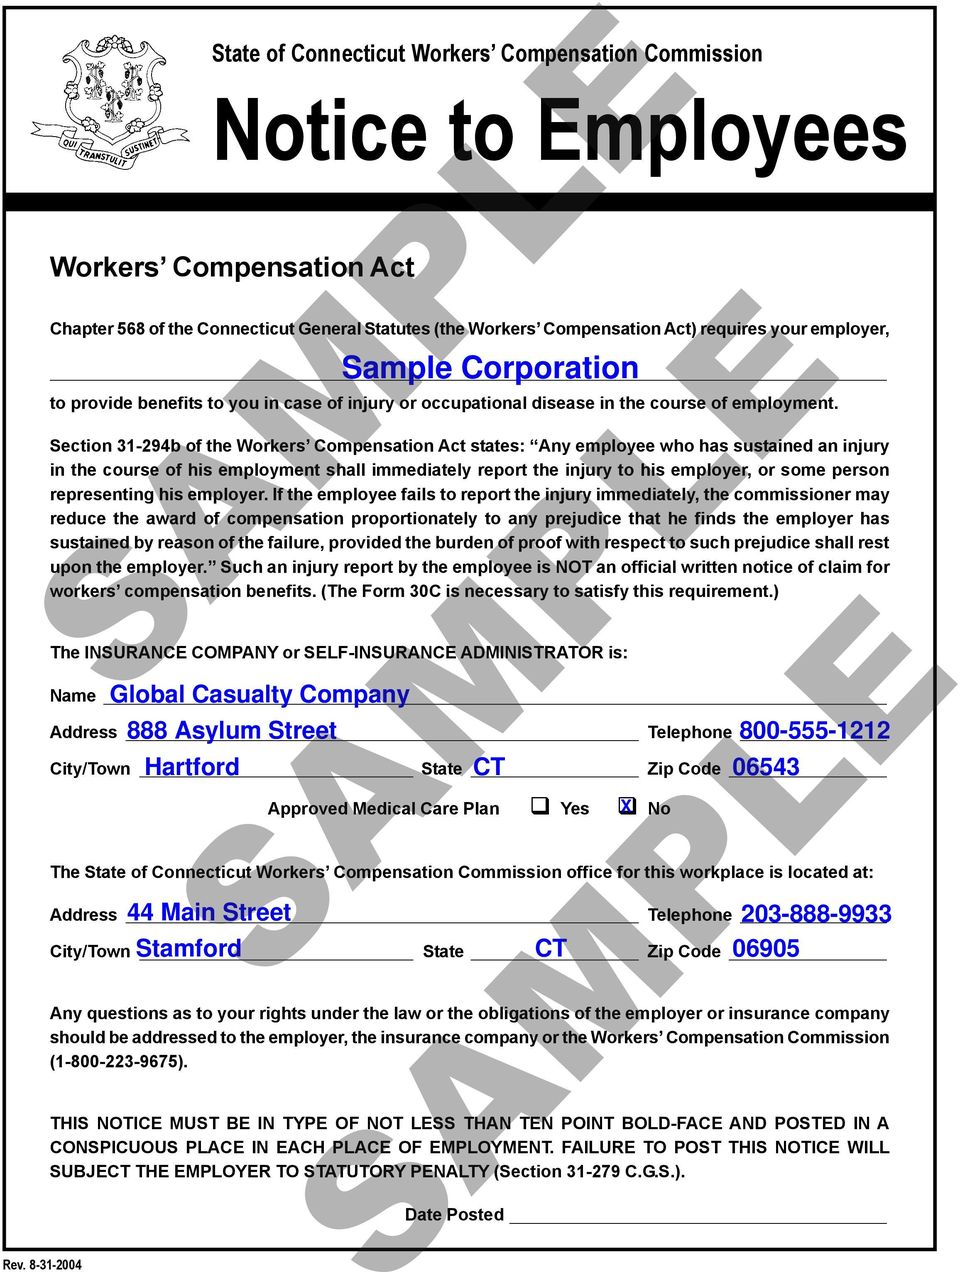 Section 31-294b of the Workers Compensation Act states: Any employee who has sustained an injury in the course of his employment shall immediately report the injury to his employer, or some person